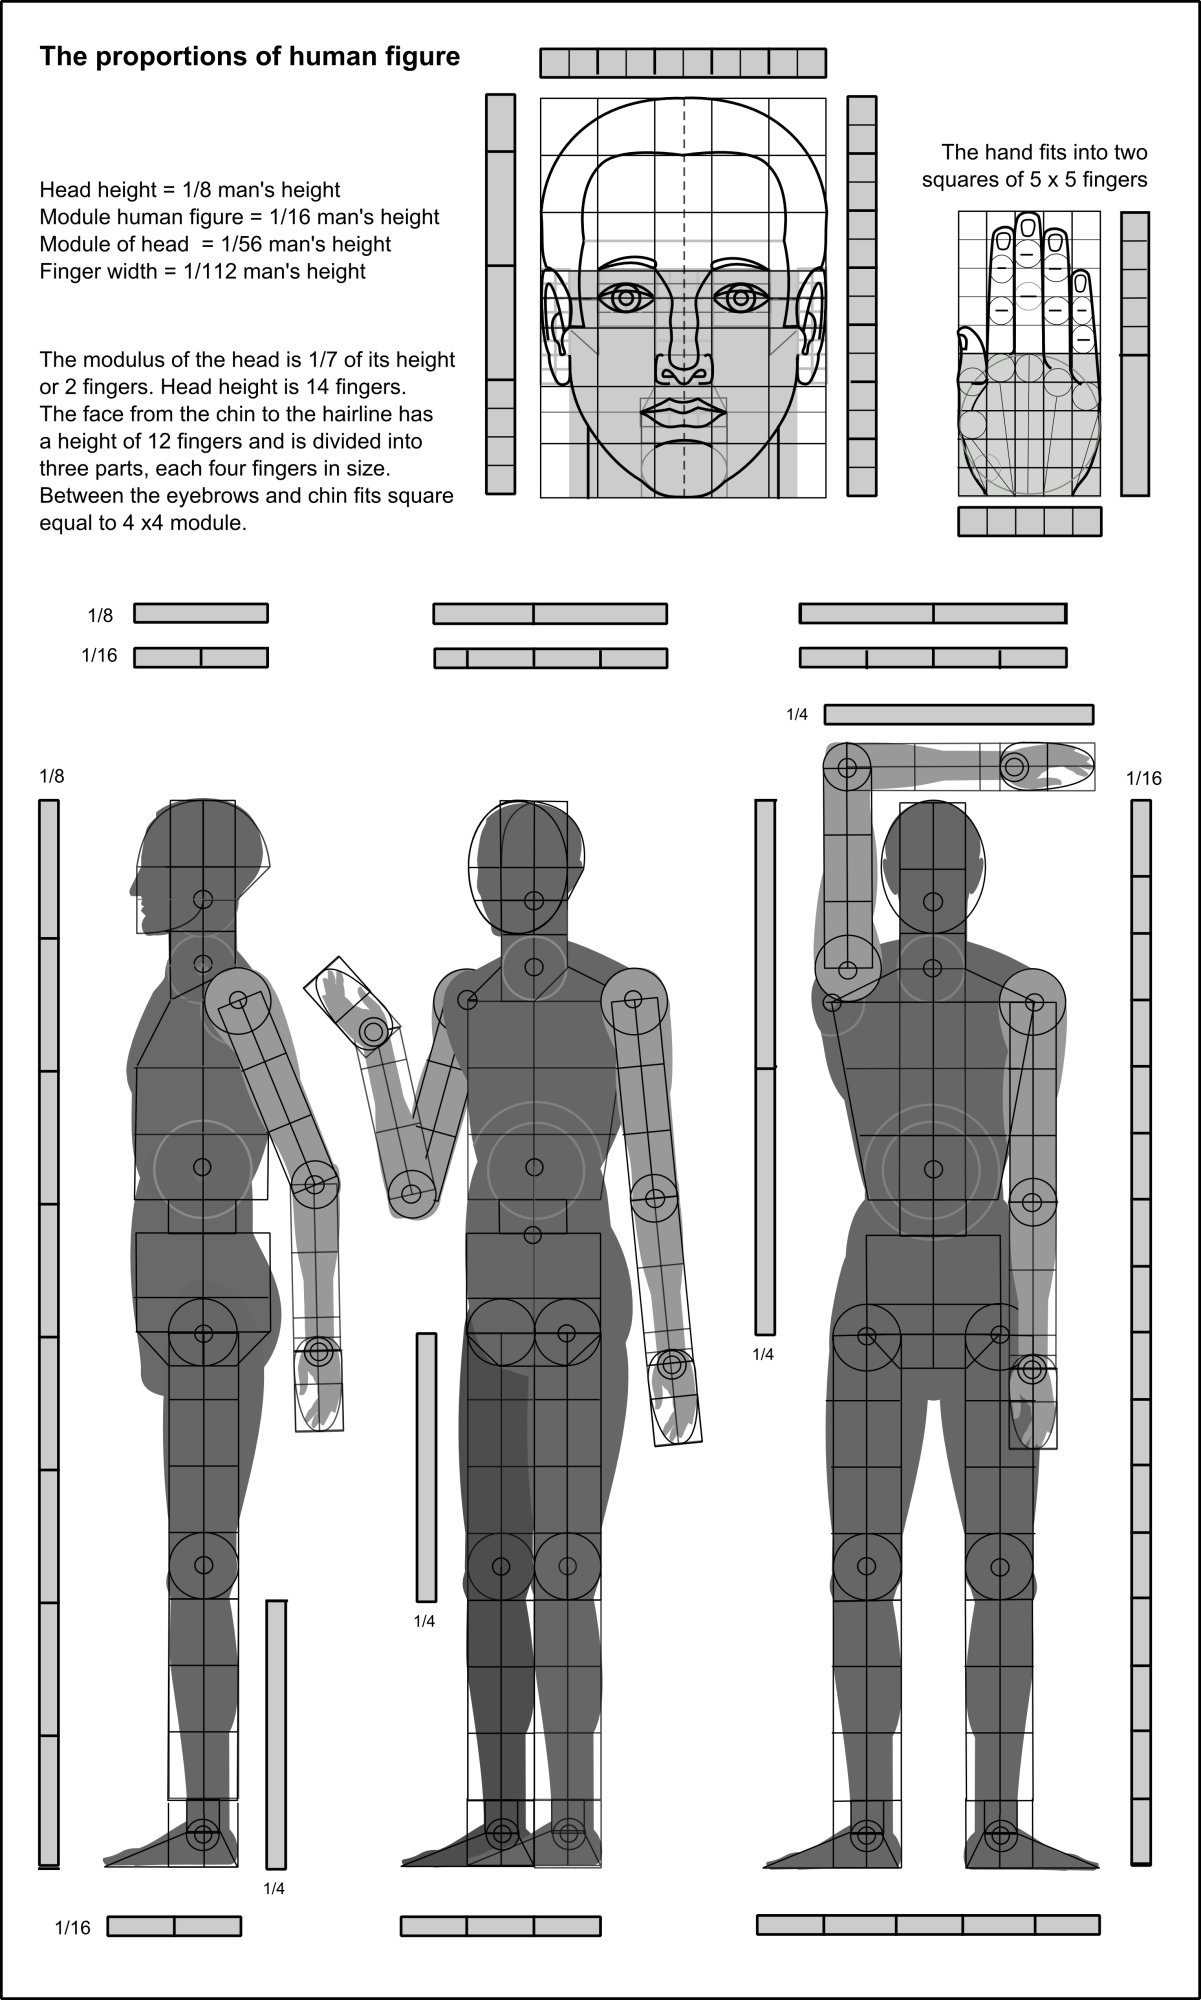 Diagram of a human figure proportions the centers of rotation of the joints and the general module for the head, wrist and the figure as a whole were found